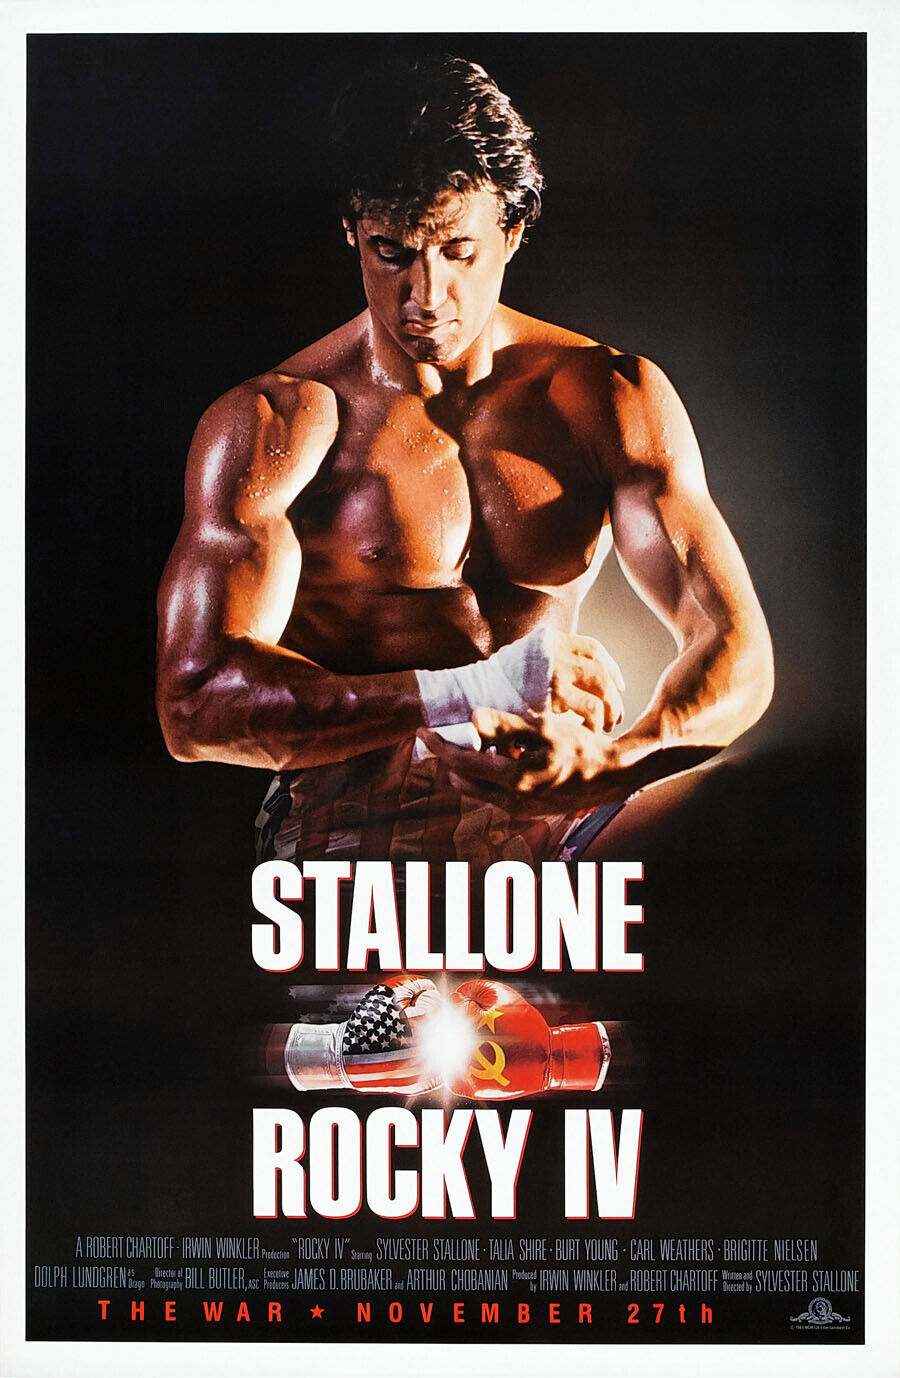 ROCKY IV MOVIE POSTER 1 Sheet RARE ORIGINAL ROLLED 27x41 SYLVESTER STALLONE